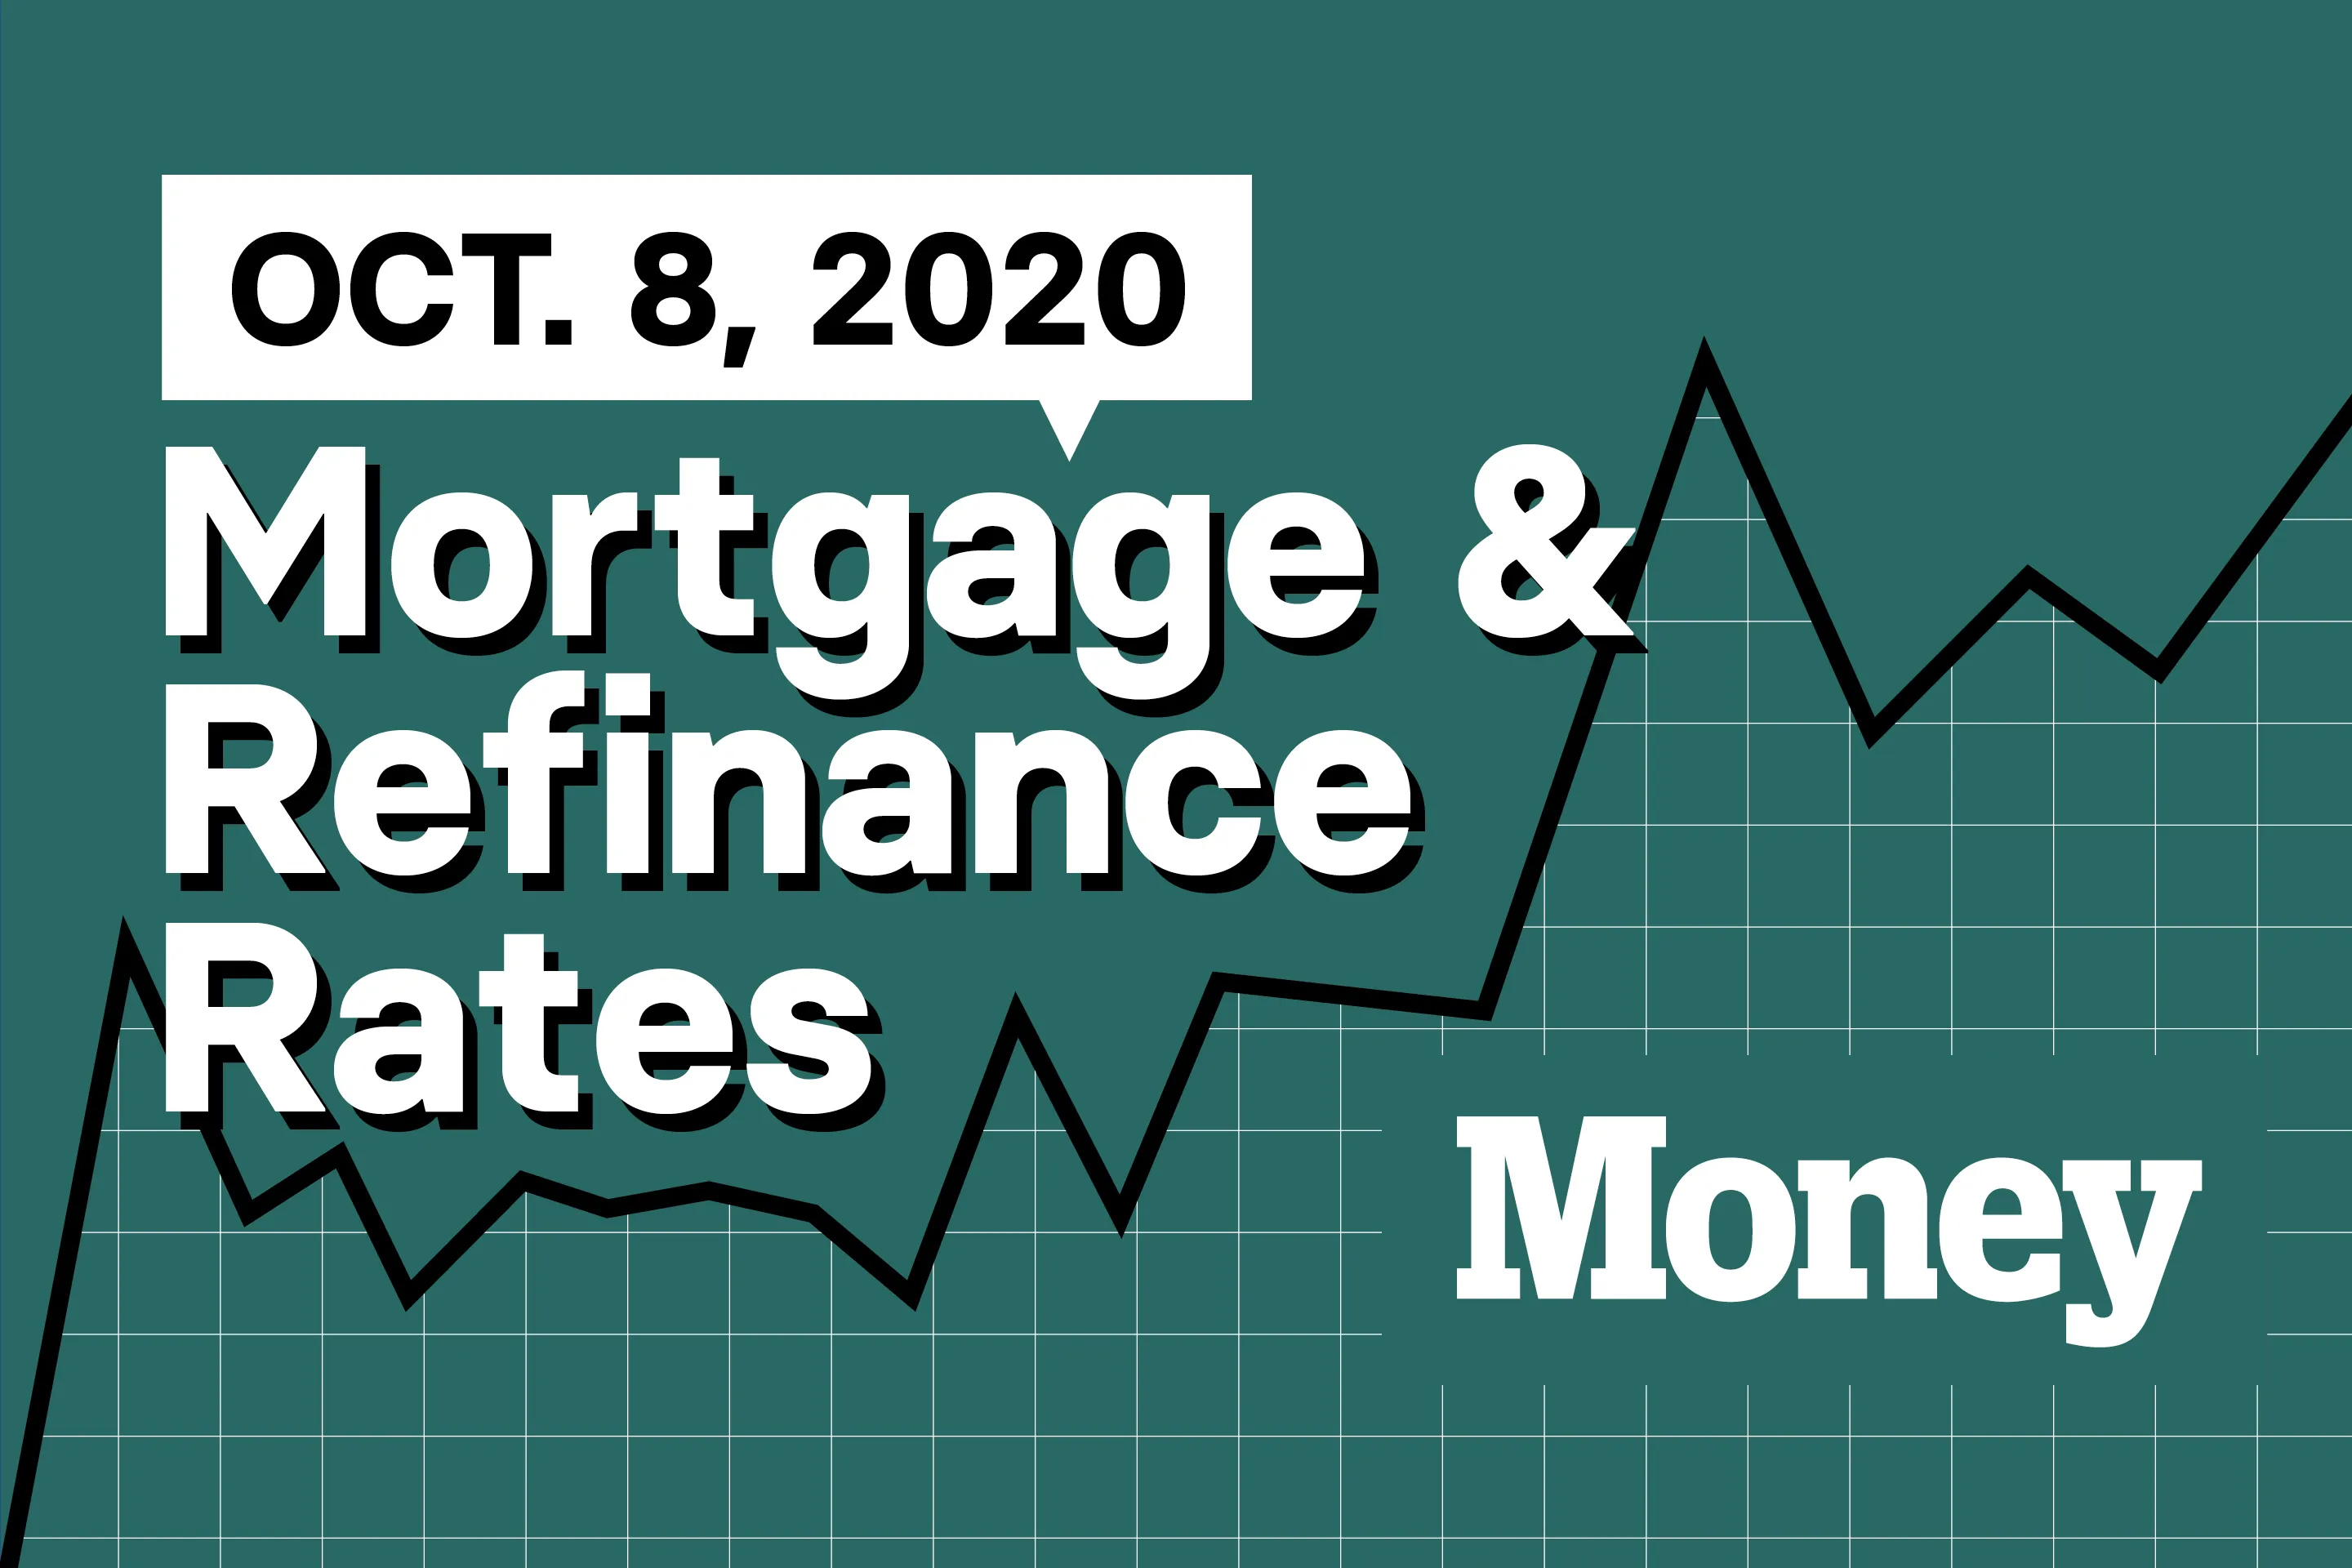 Here Are Today's Best Mortgage & Refinance Rates for October 8, 2020